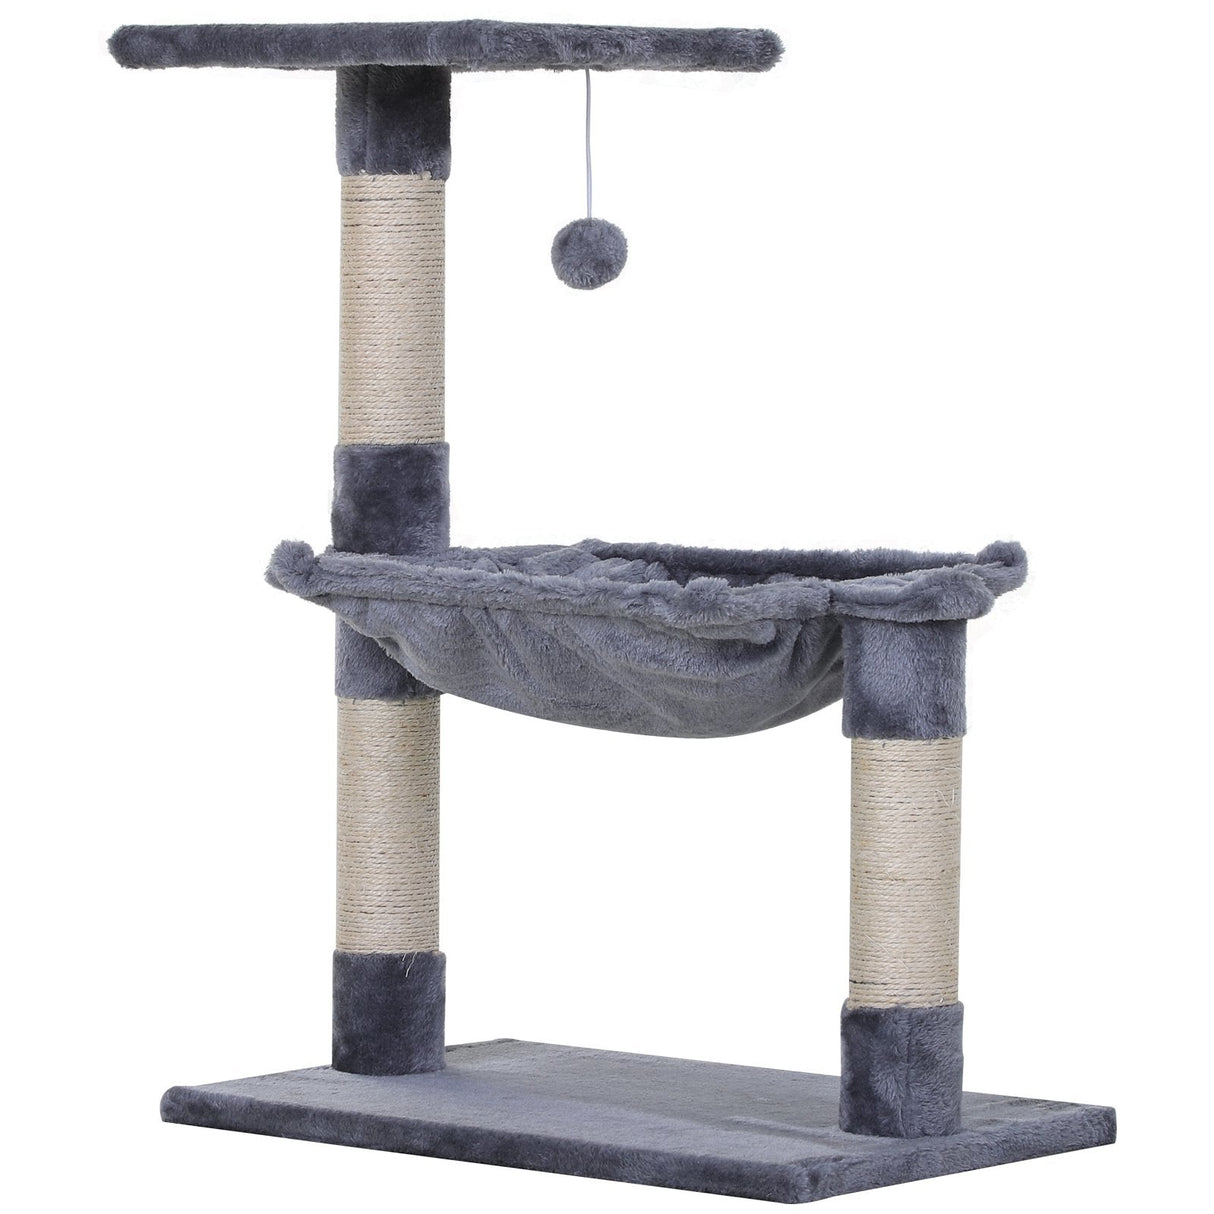 70cm Cat Tree for Indoor Cats Durable Natural Sisal Scratching Posts Hammock Bed Kitty Activity Center, PawHut, Beige